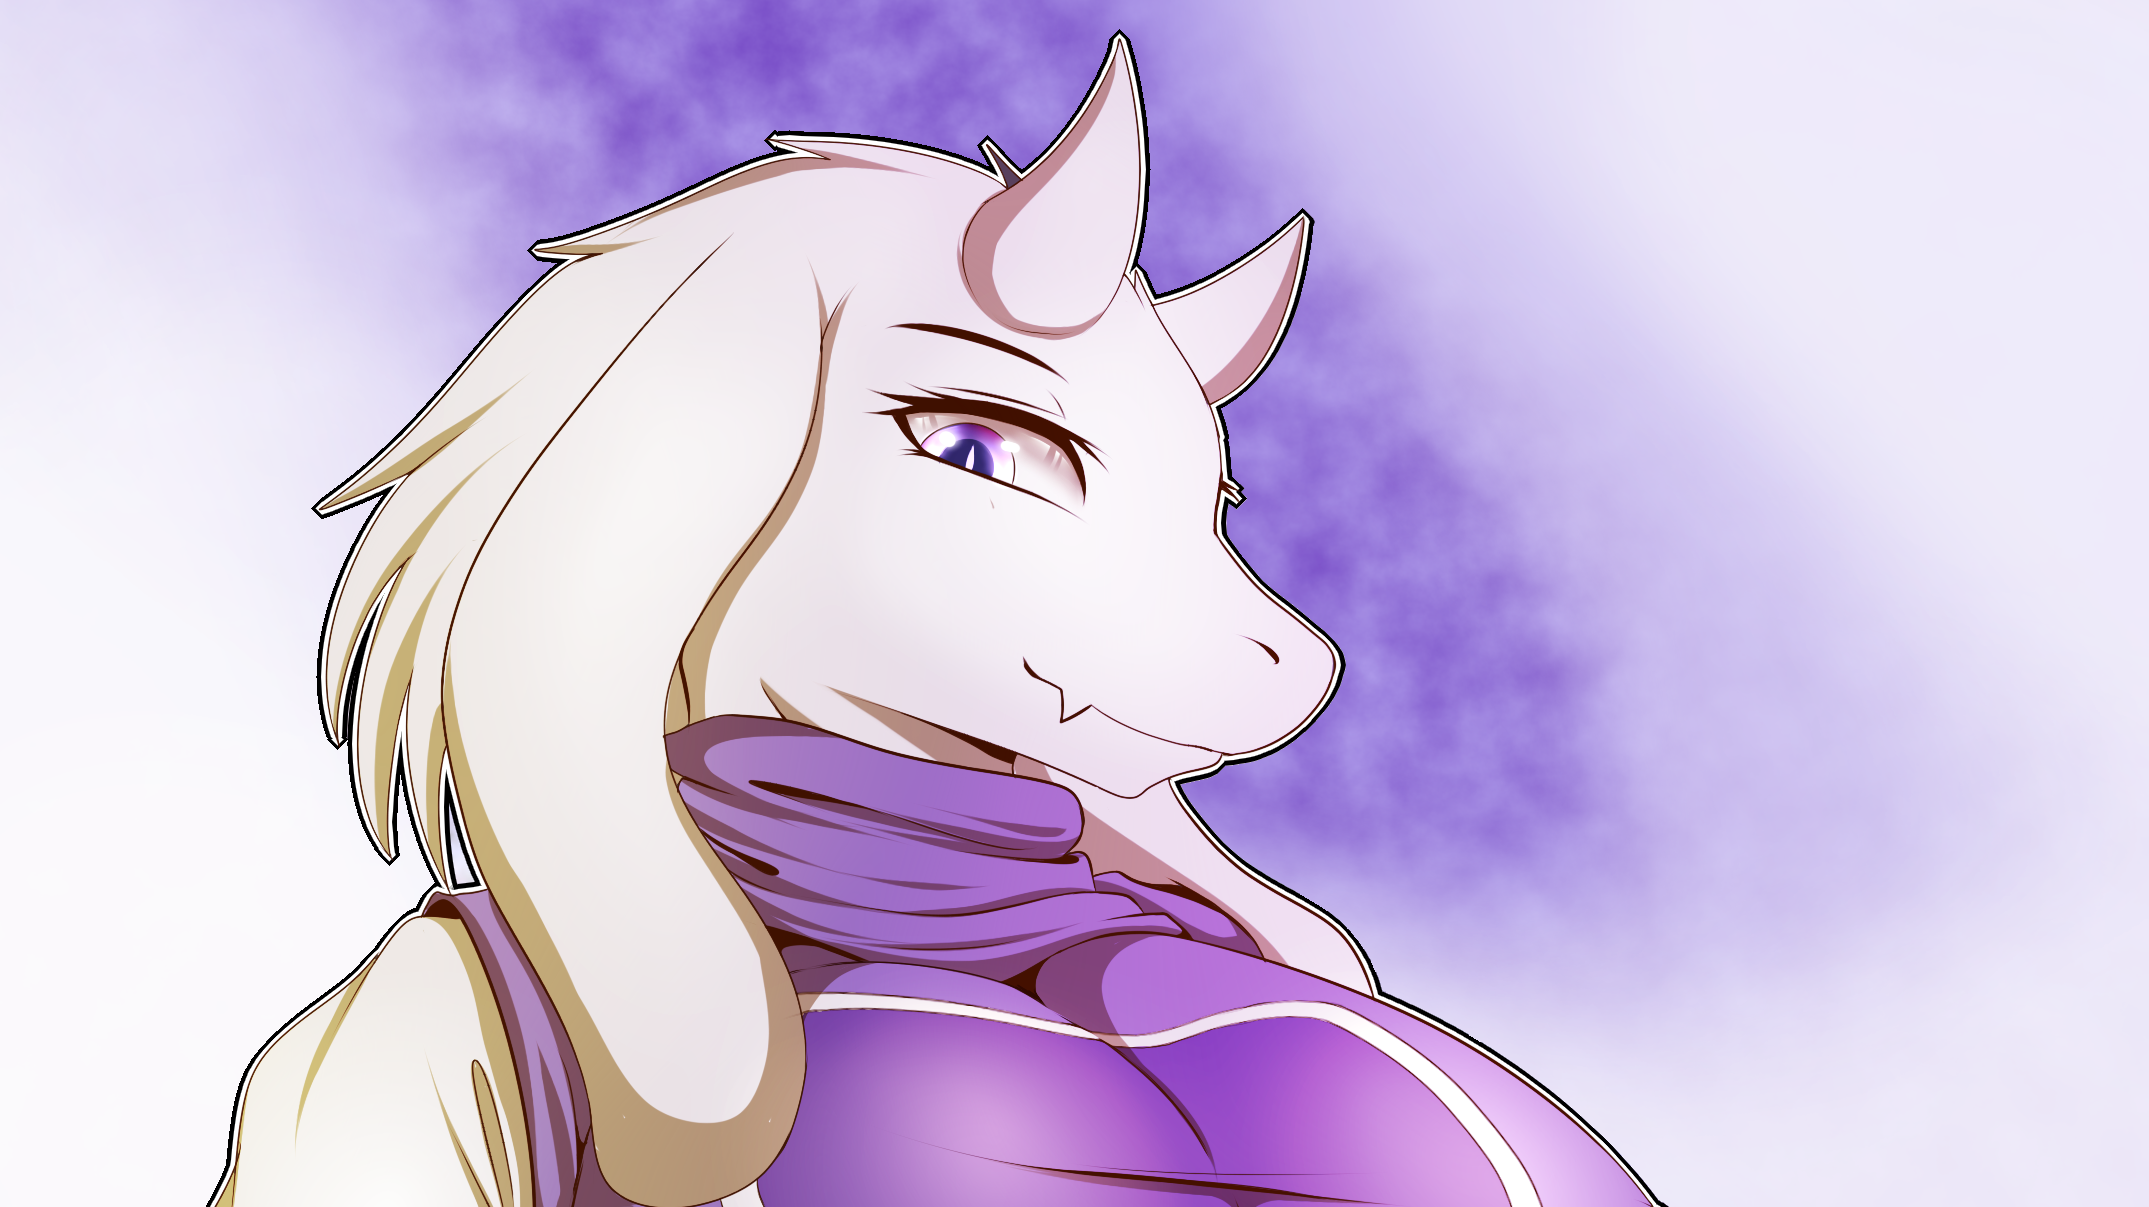 Furry Anthro Anthros Undertale Toriel Wallpapers Hd